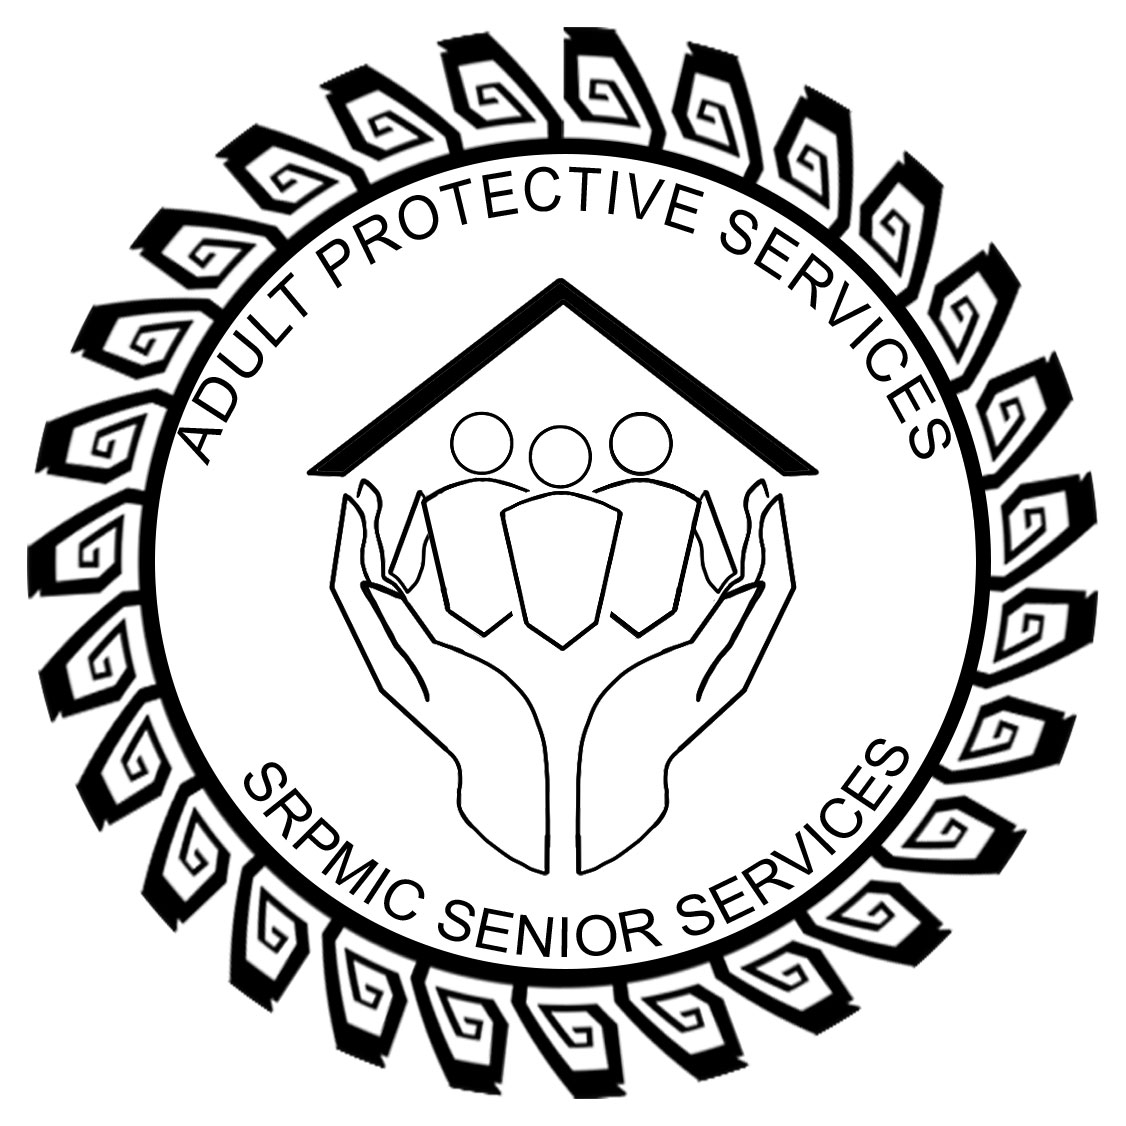 Take Action for Our Elders: World Elder Abuse Awareness Day